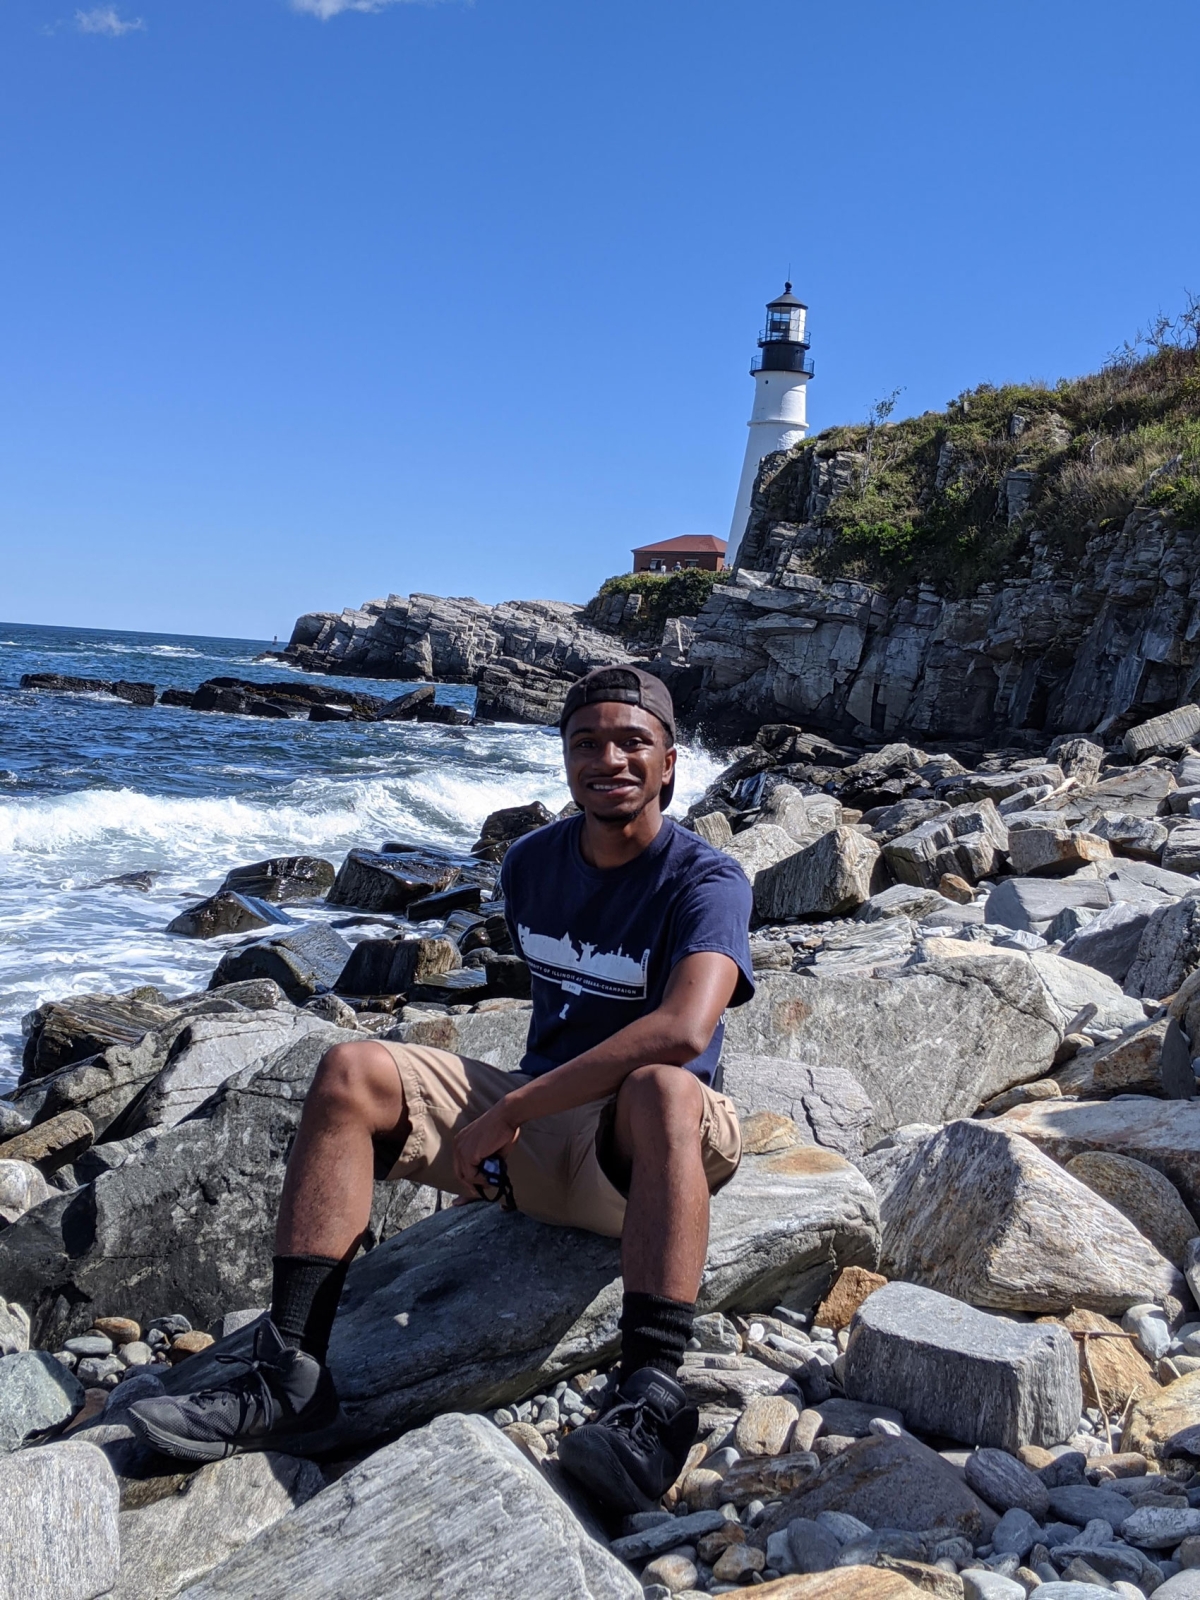 Kai Hardy sits on rocks near a body of water with a lighthouse in the background